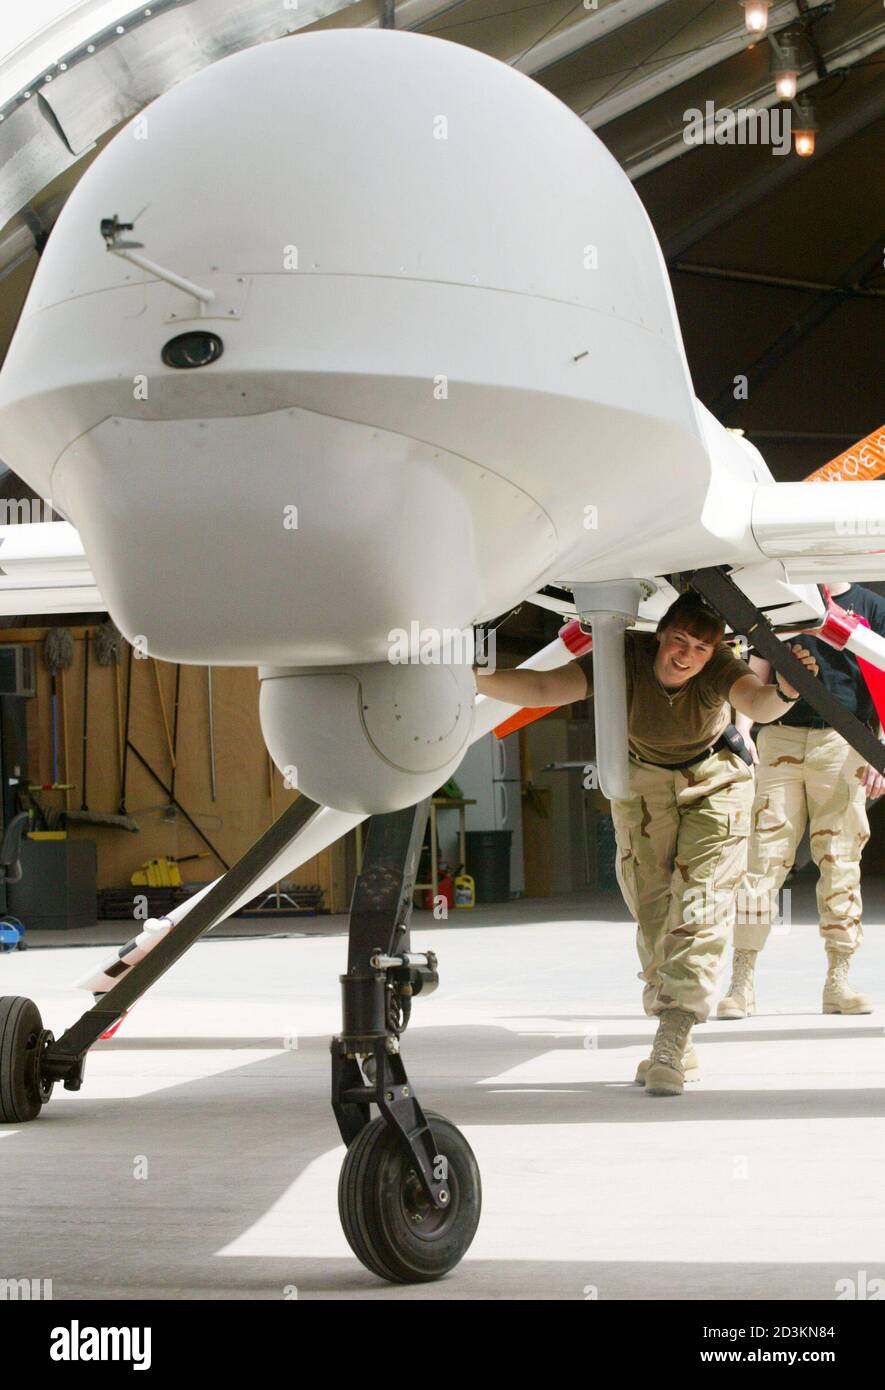 A United States Air Force technician pushes a Predator unmanned surveillance plane out of its hangar at an airbase in the Gulf March 10, 2003. France waged a diplomatic battle against the United States and Britain on Monday to woo wavering nations into the anti-war camp for a U.N. vote unlikely to alter U.S. plans to invade Iraq. REUTERS/Chris Helgren  CLH/ Stock Photo